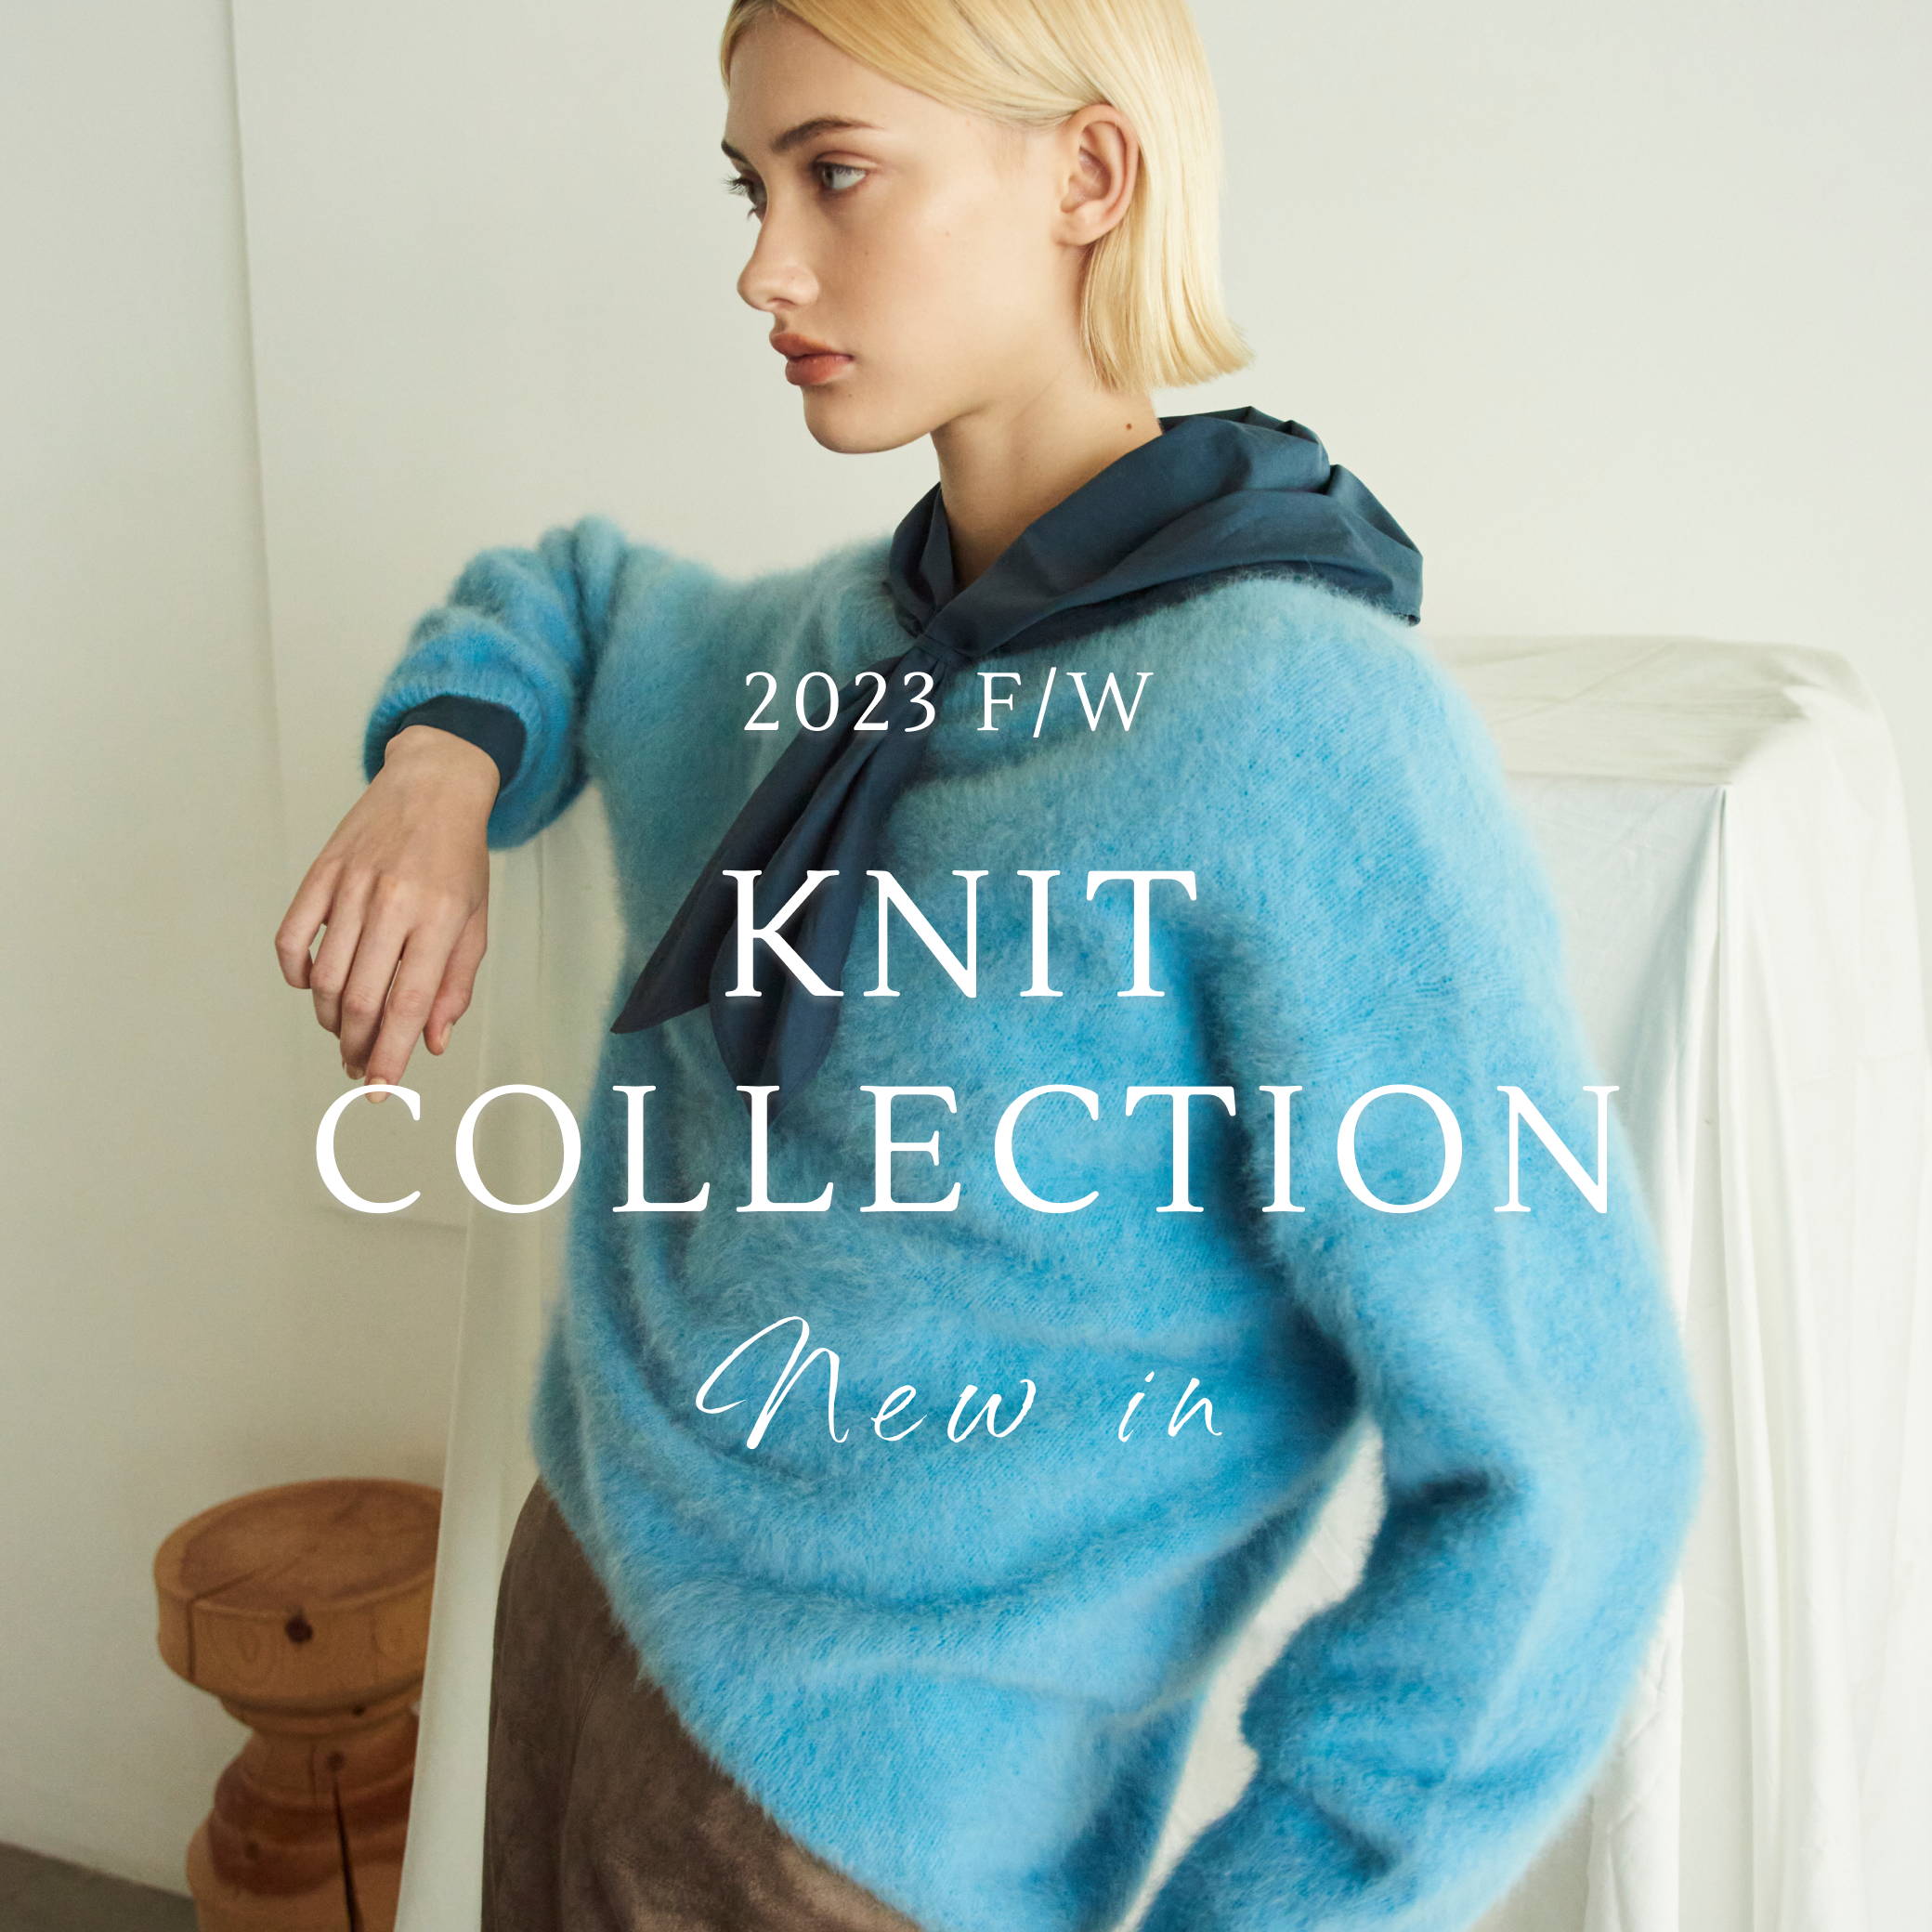 Knit collection – FACE SANS FARD